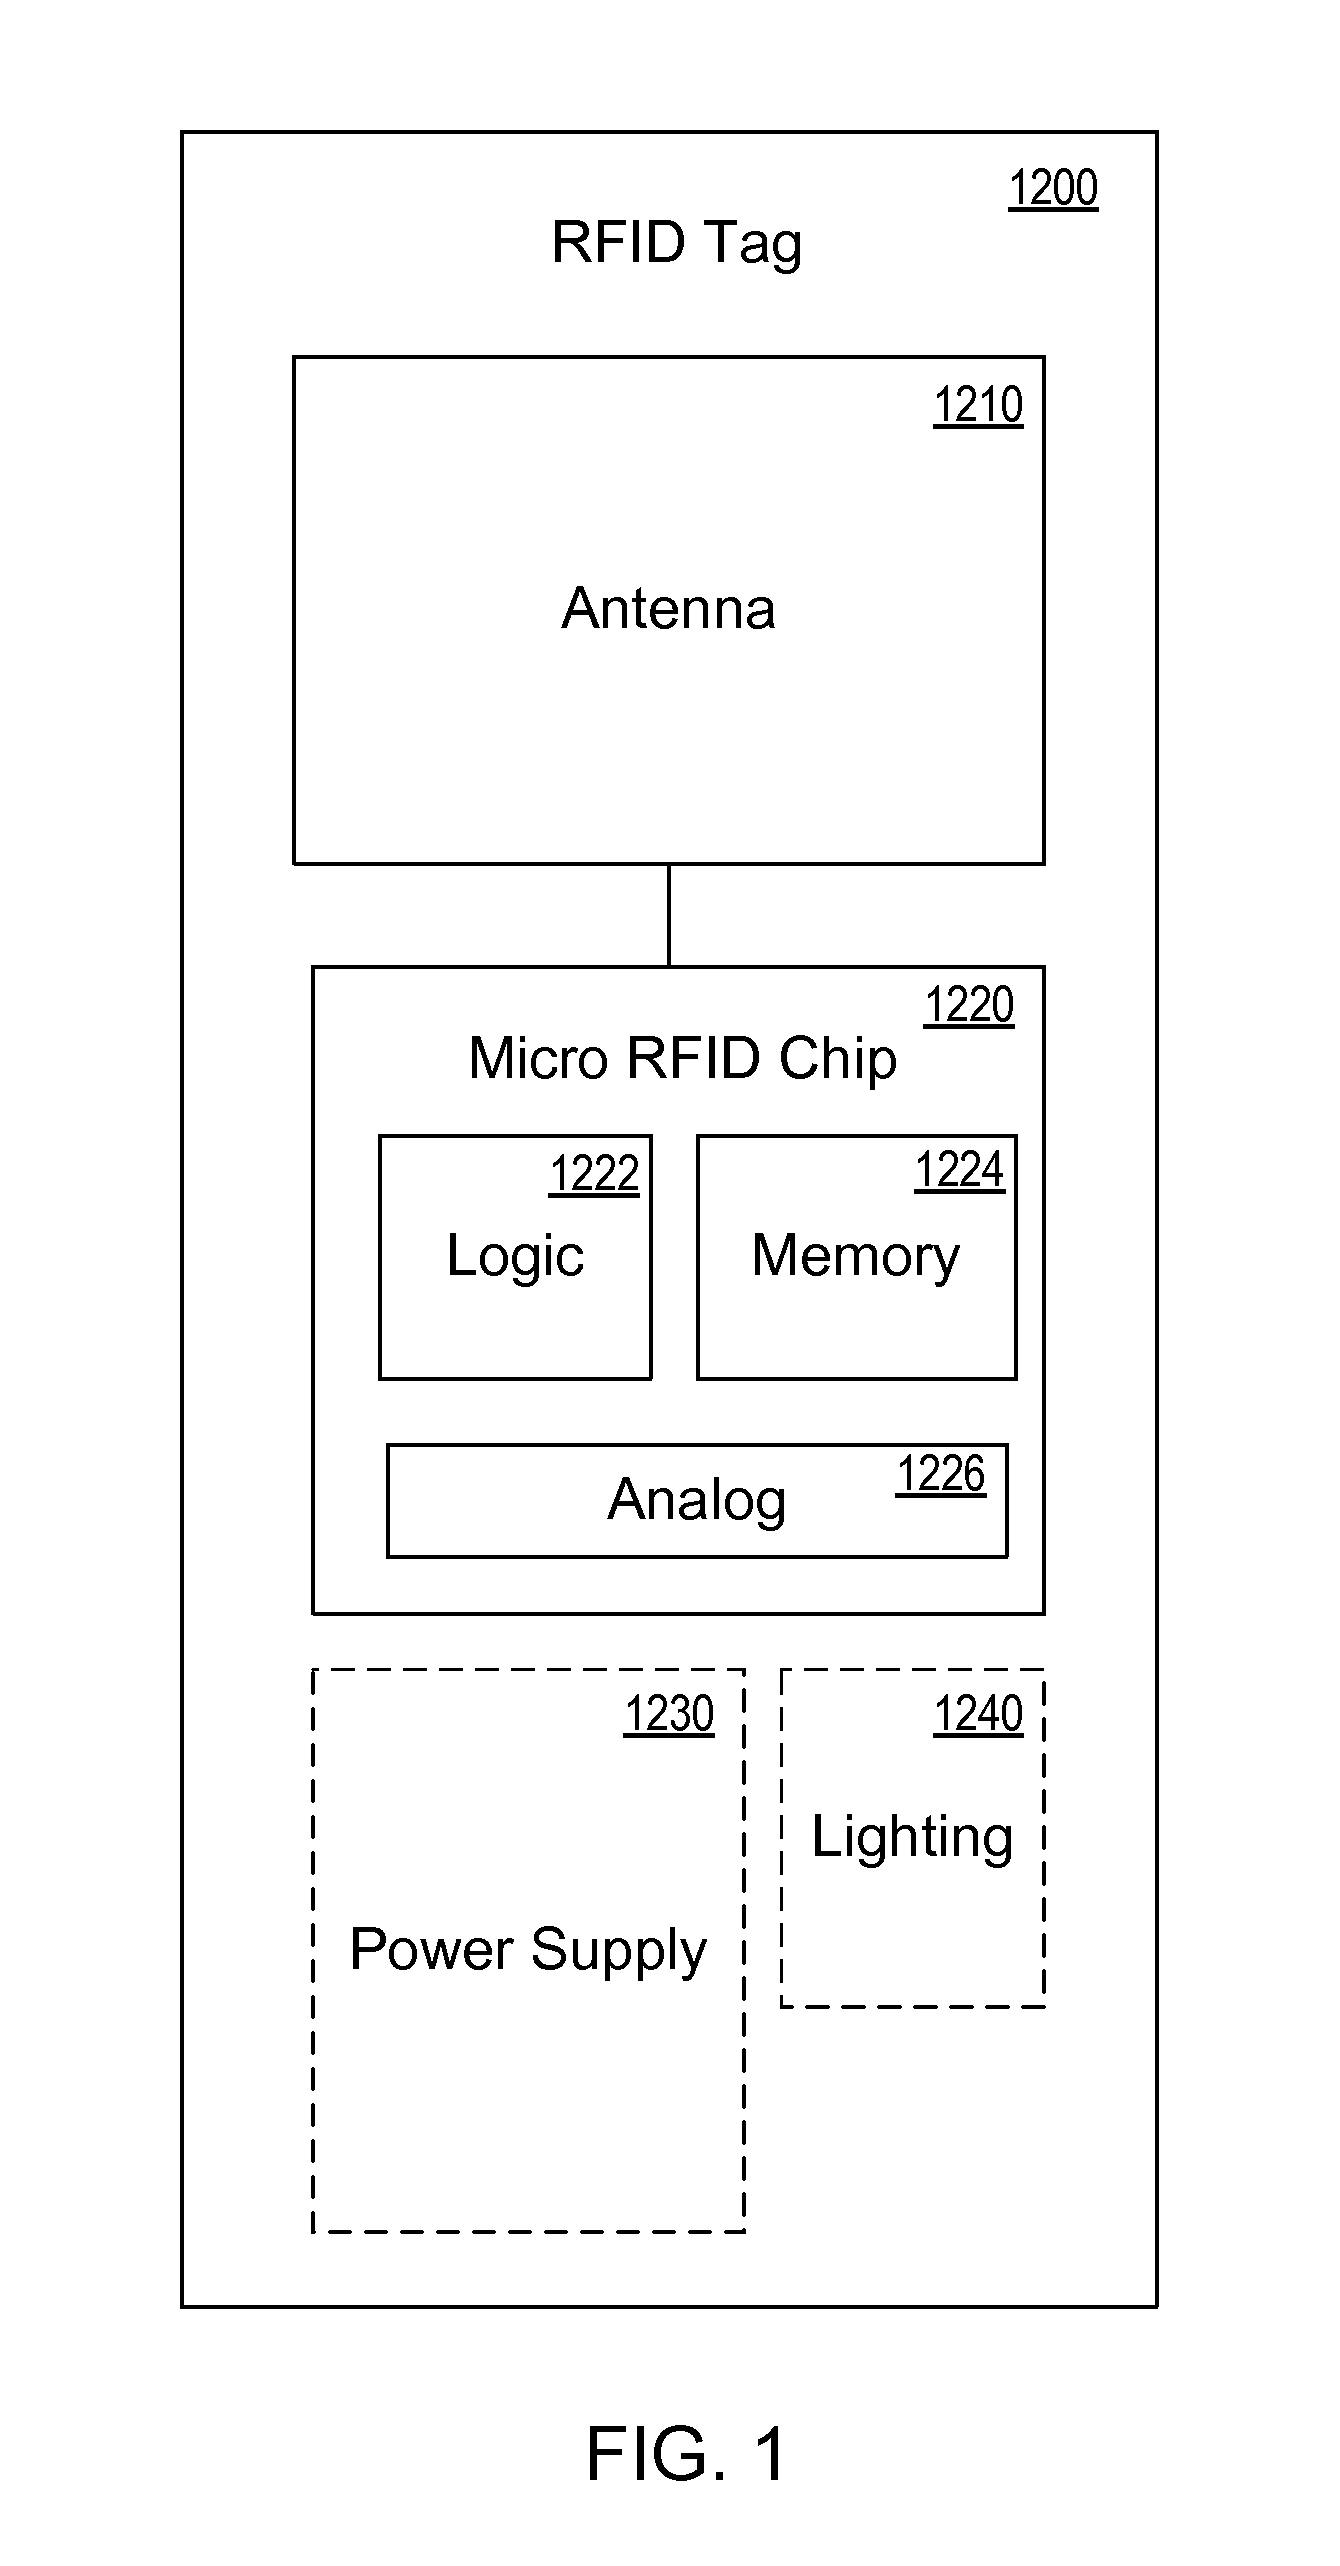 RFID tag and micro chip integration design